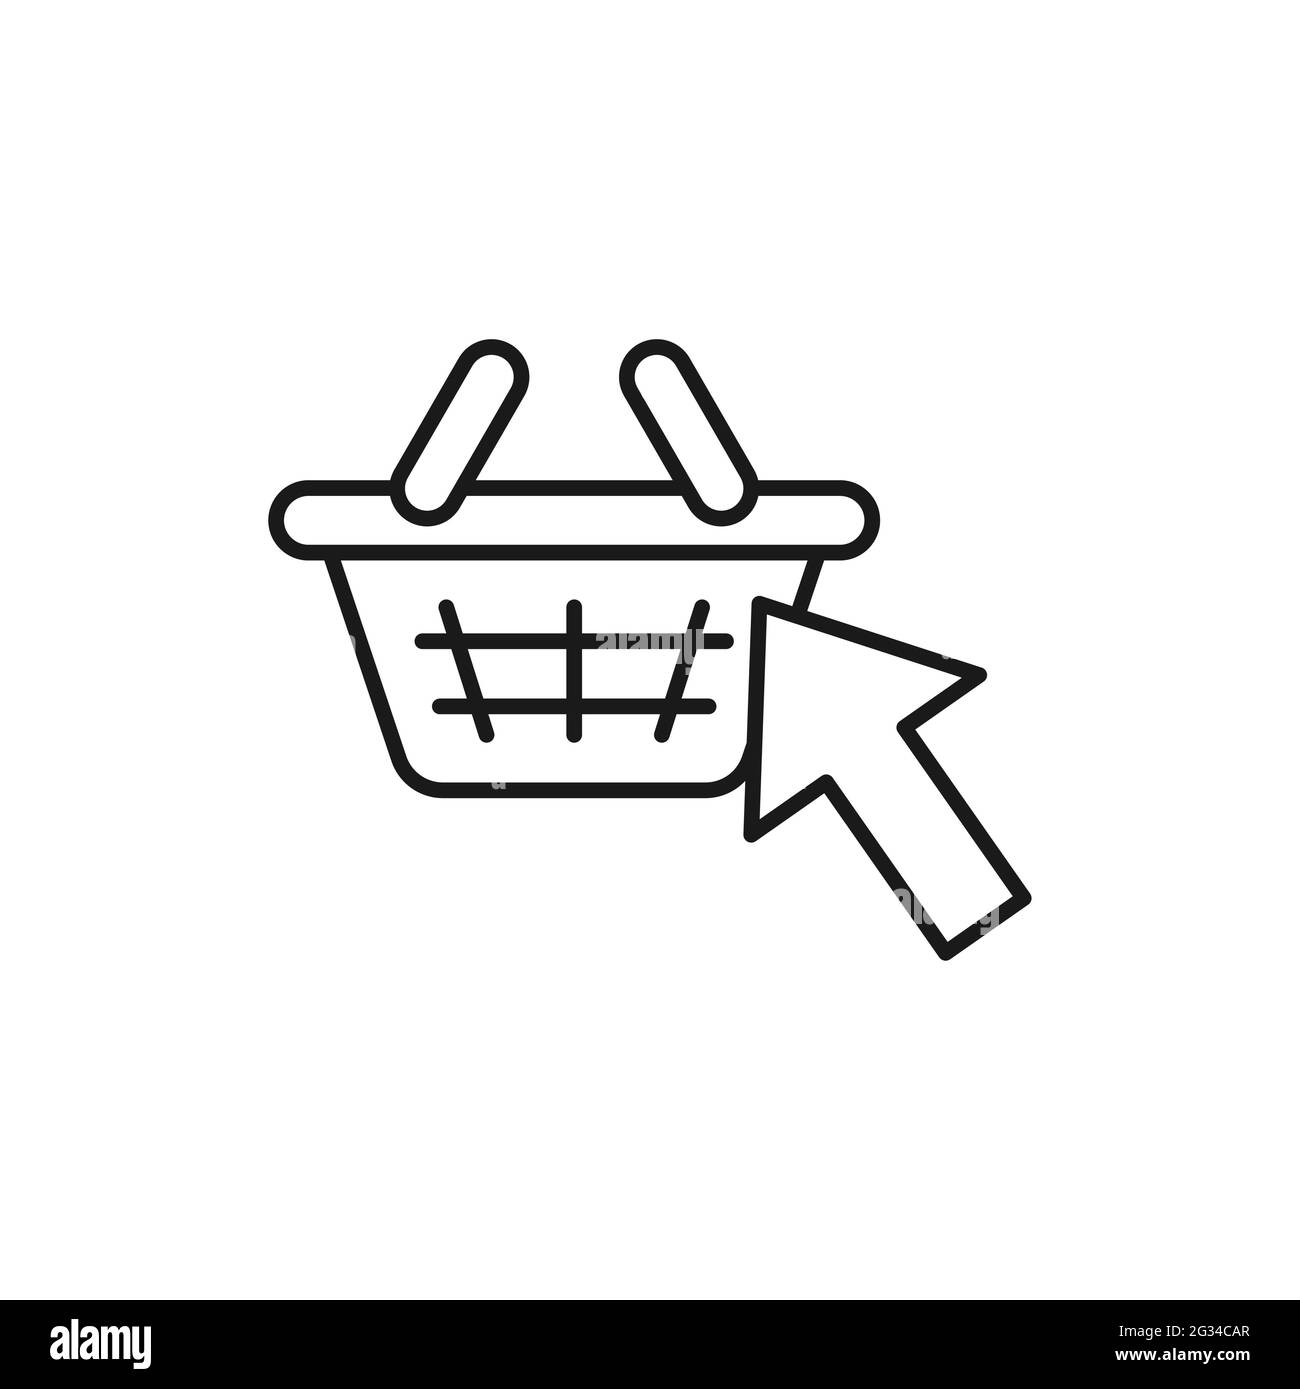 Shopping Cart with Arrow icon Vector Design. Shopping Cart icon with Arrow design concept for e-commerce, online store and marketplace website, mobile Stock Vector